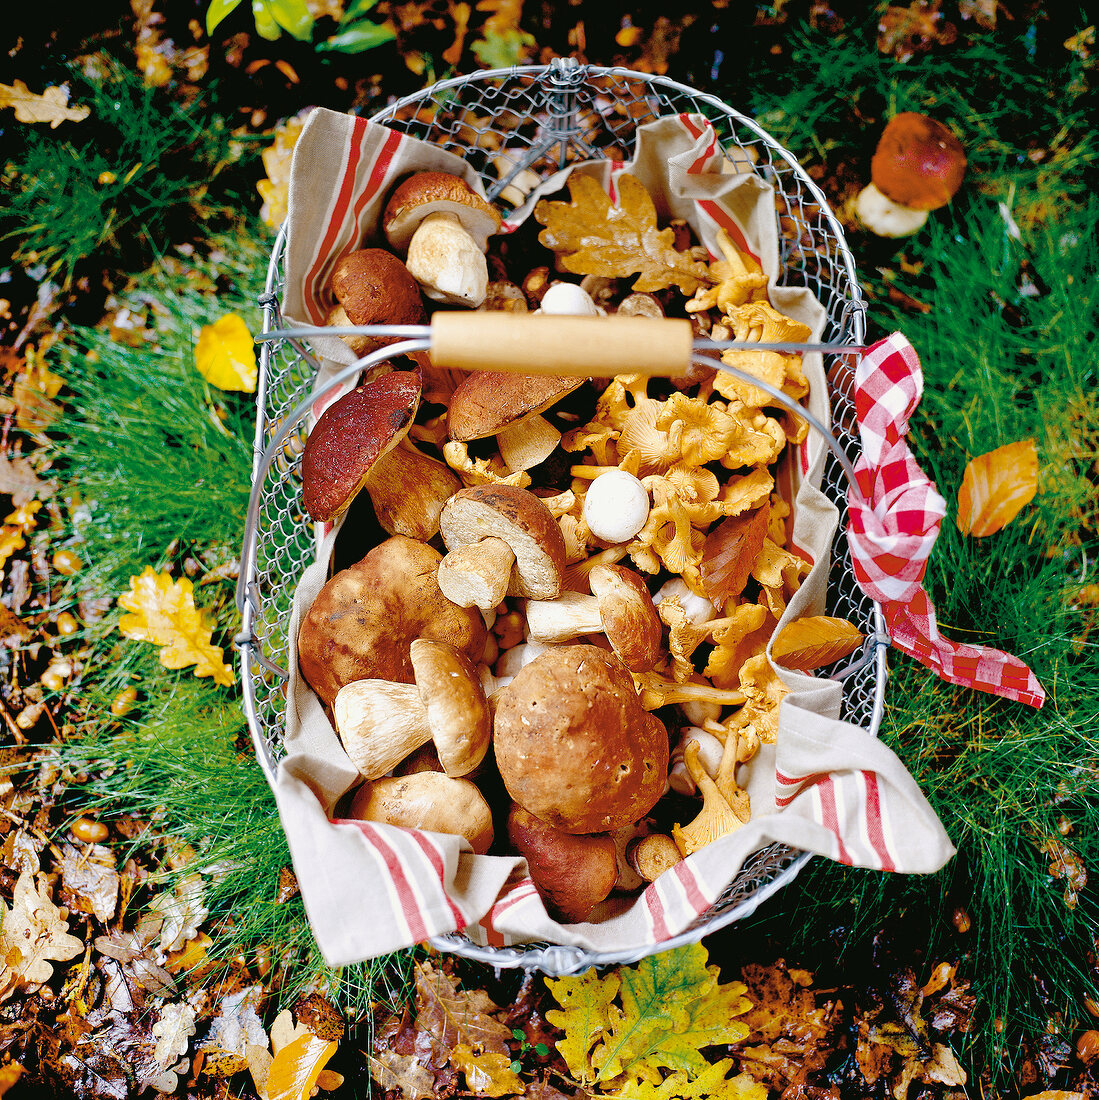 Variety of mushroom in wire basket with autumn leaves around